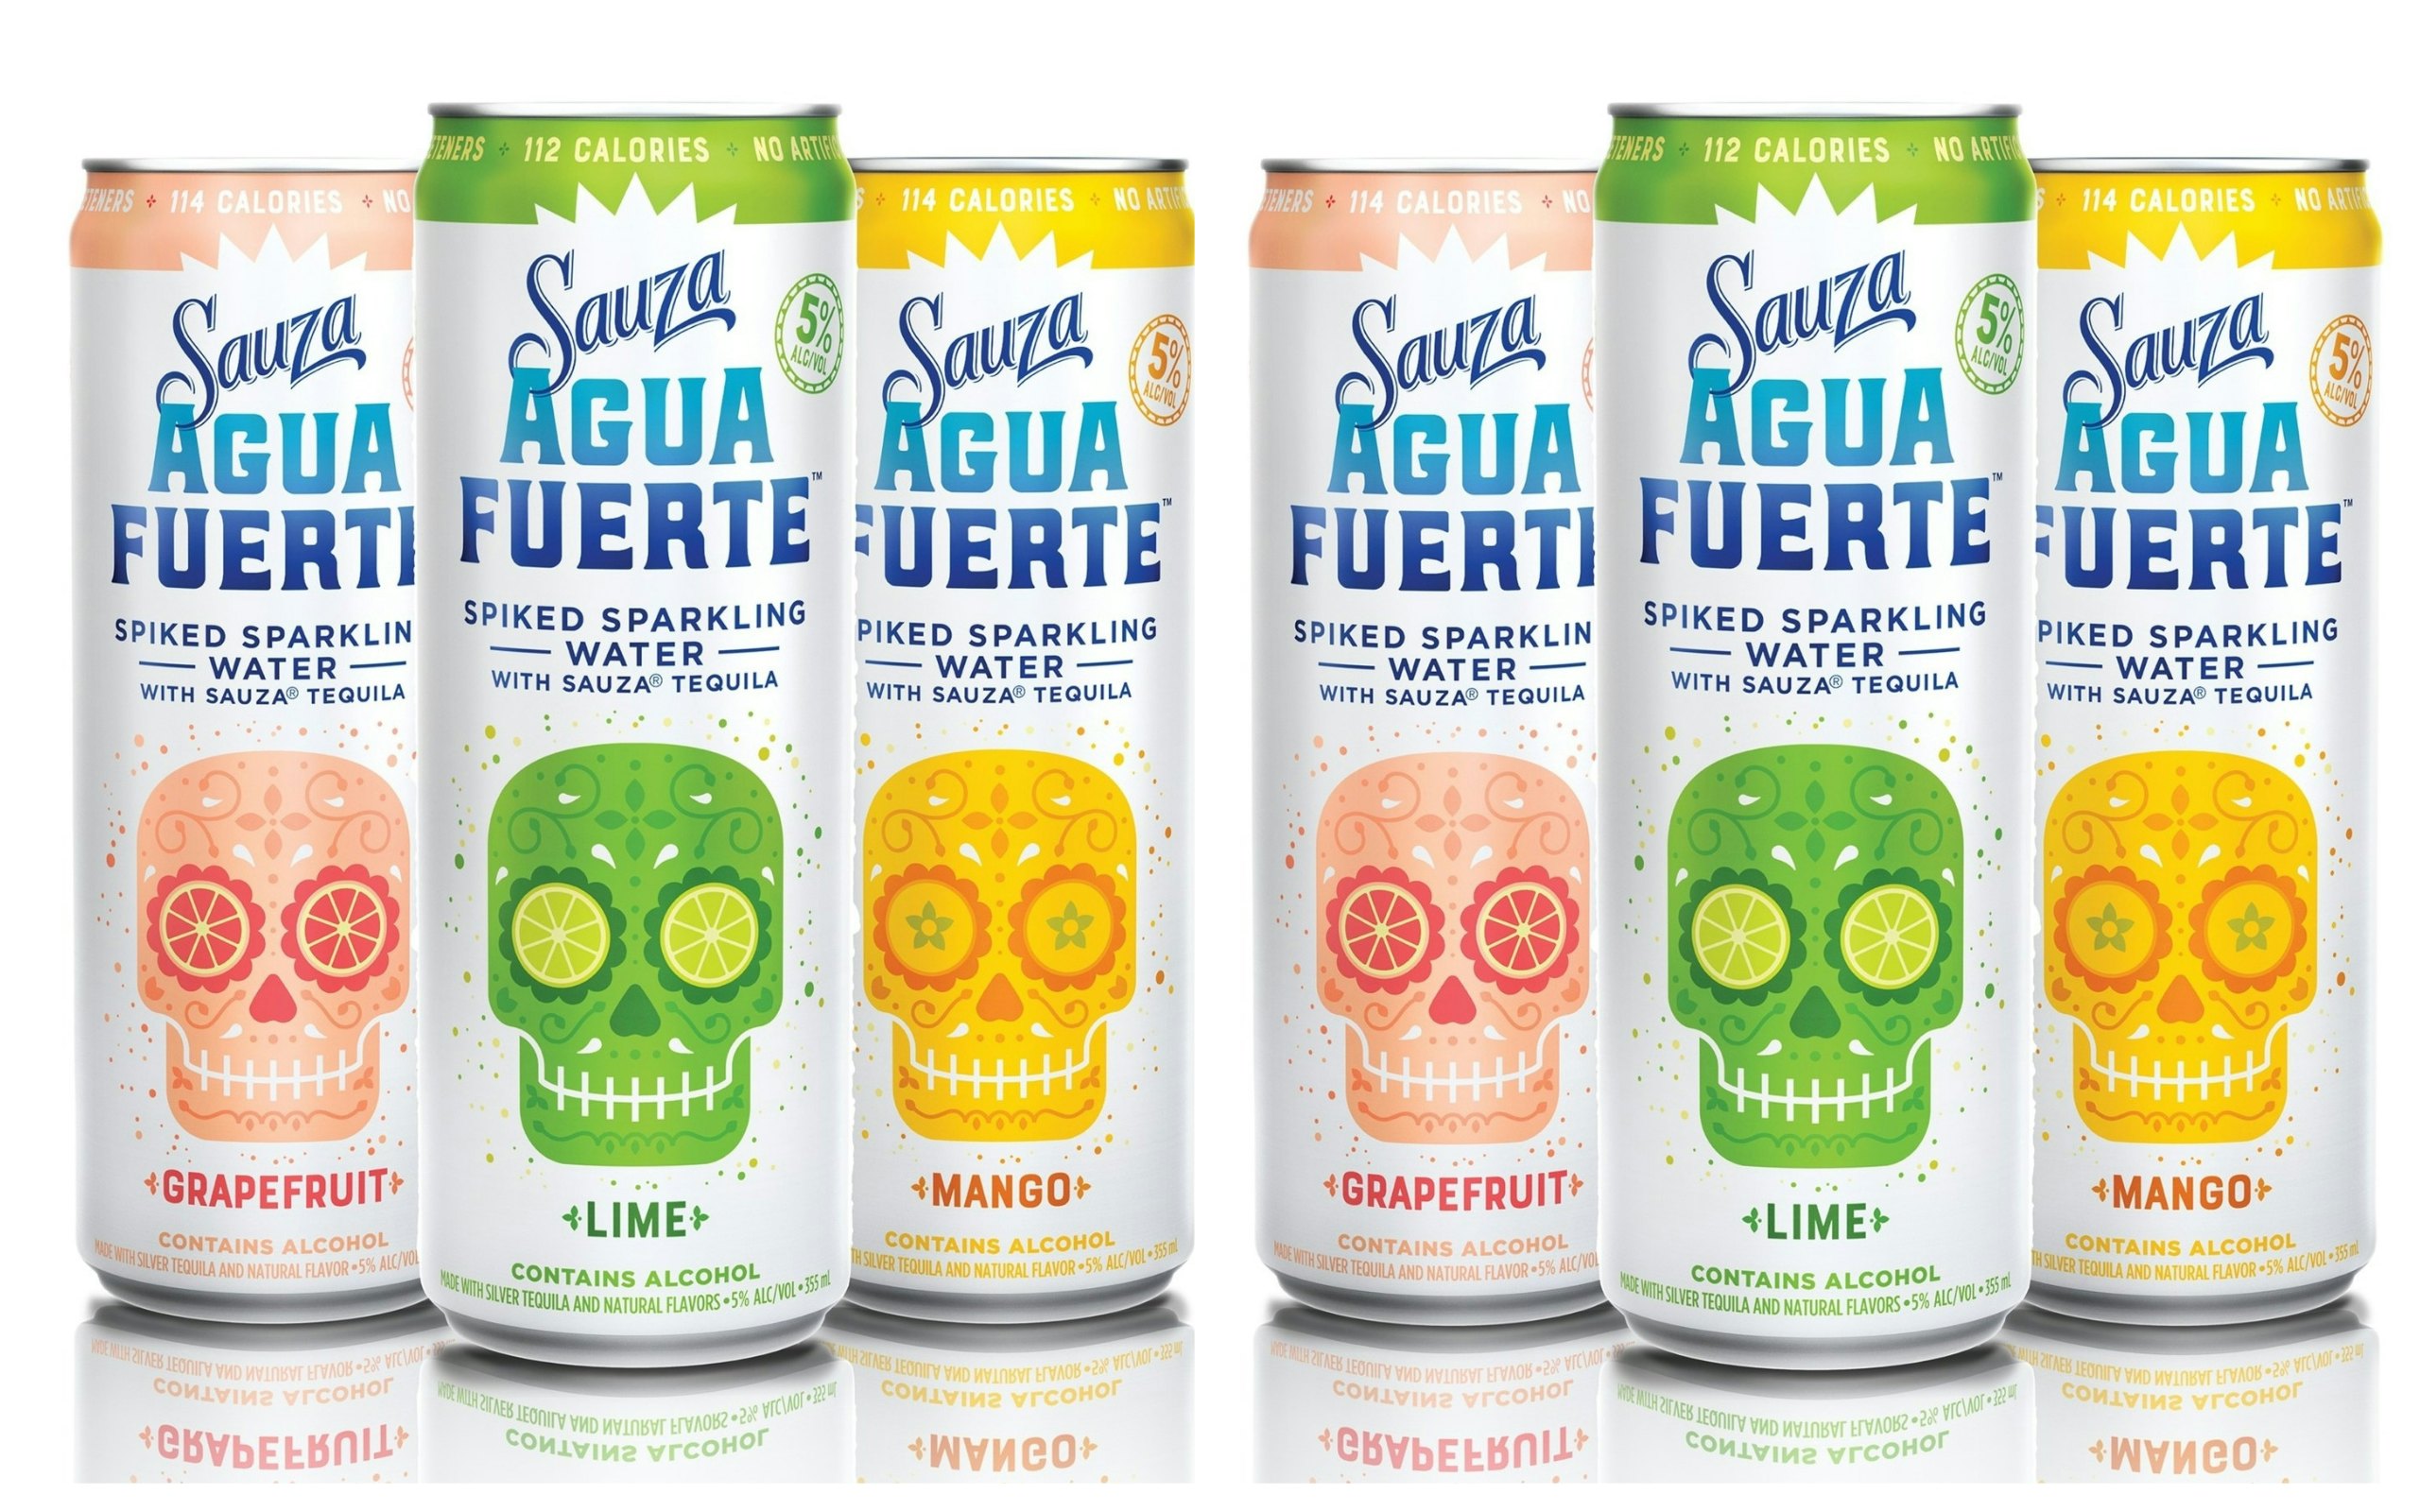 This Tequila Spiked Sparkling Water From Sauza Tequila Is The First Of Its Kind,Guard Dogs Pitbull